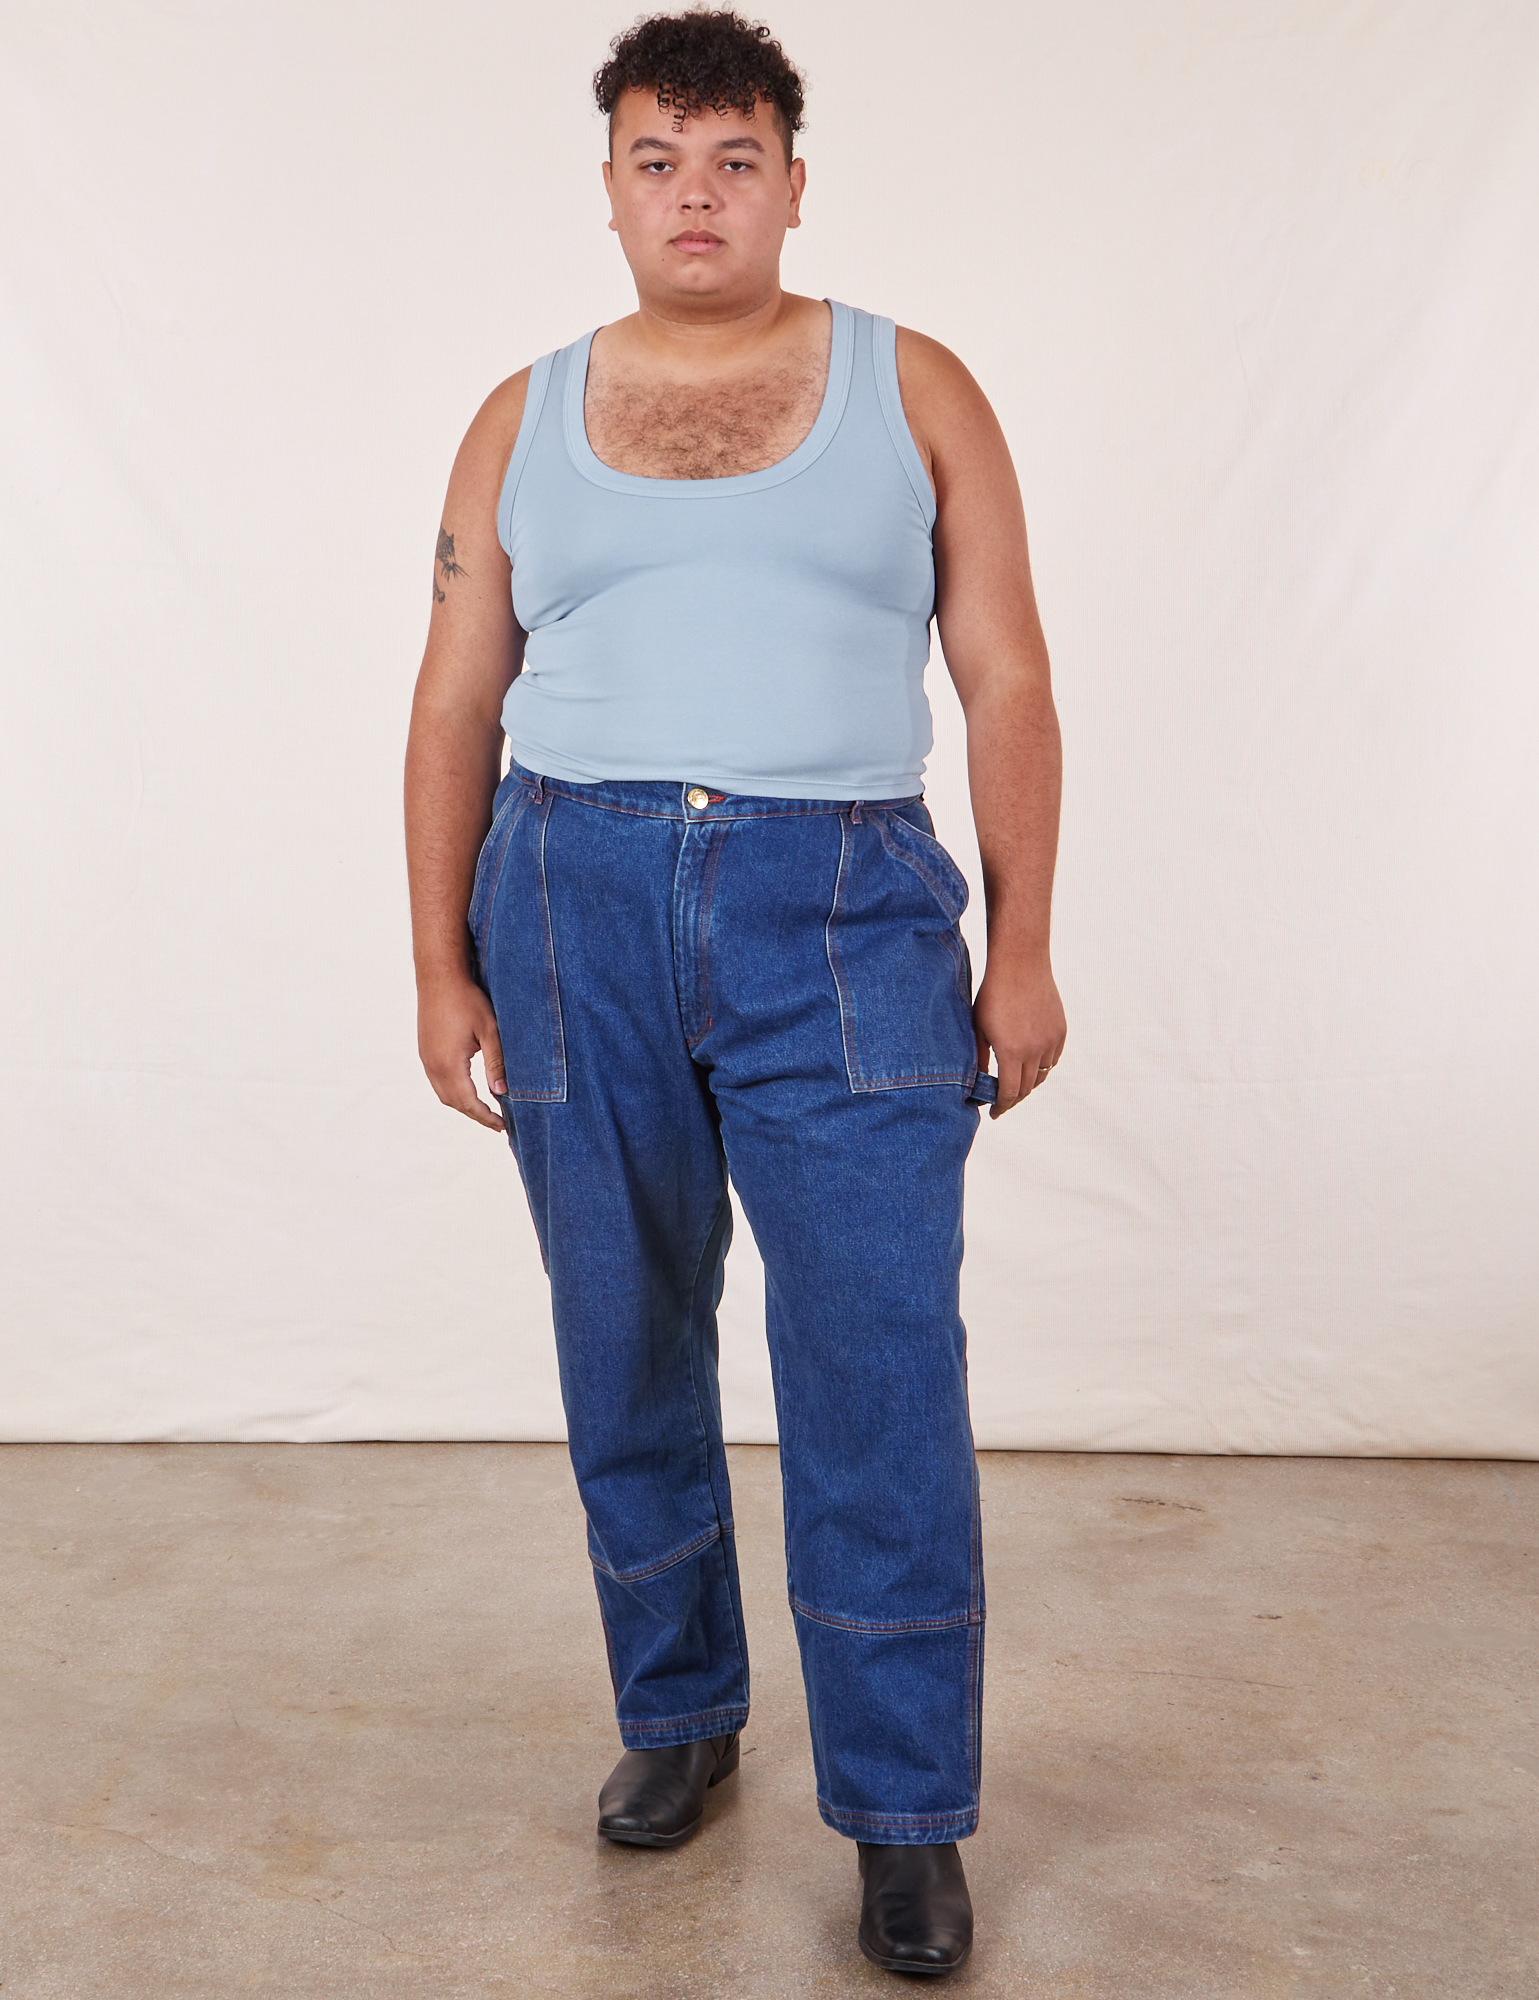 Miguel is 6&#39;0&quot; and wearing 1XL Cropped Tank Top in Periwinkle paired with dark wash Carpenter Jeans